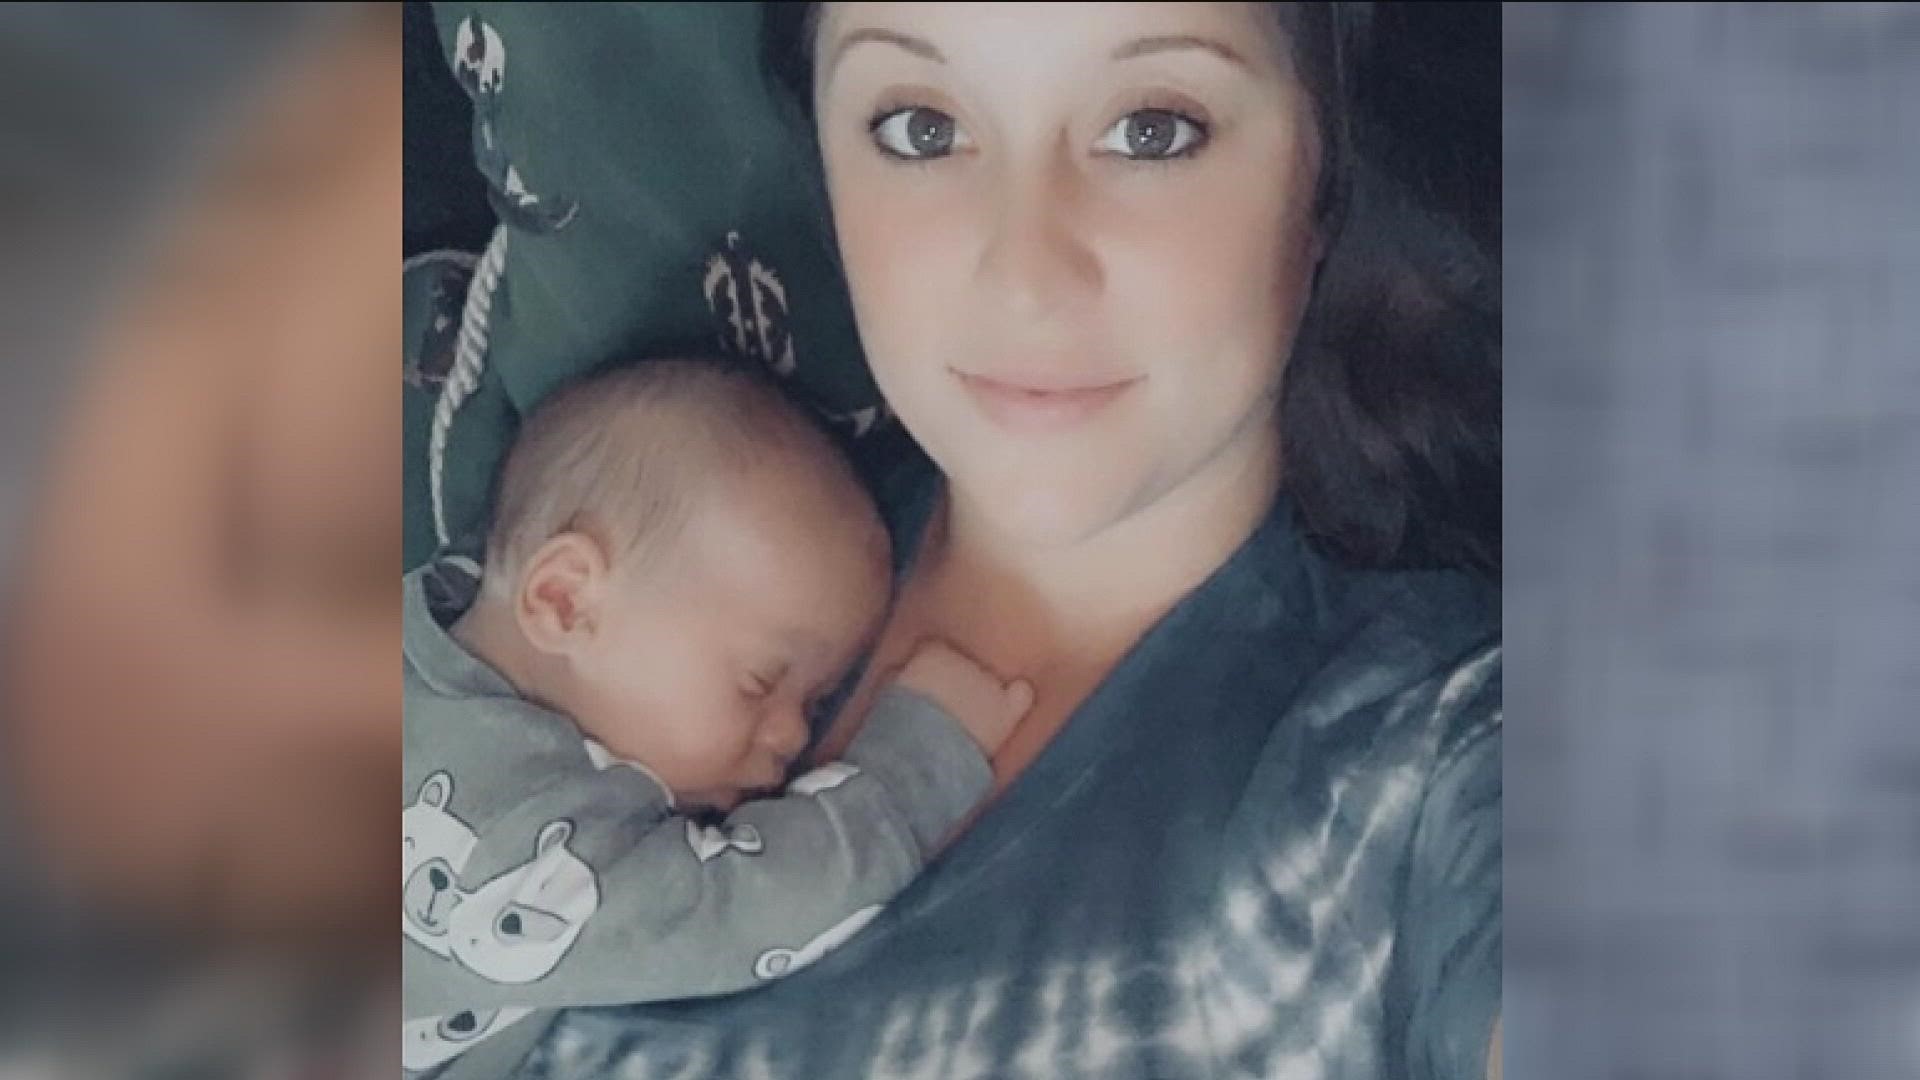 A devastated family from Covington is searching for justice after a 29-year-old new mother was shot to death sitting next to her infant.